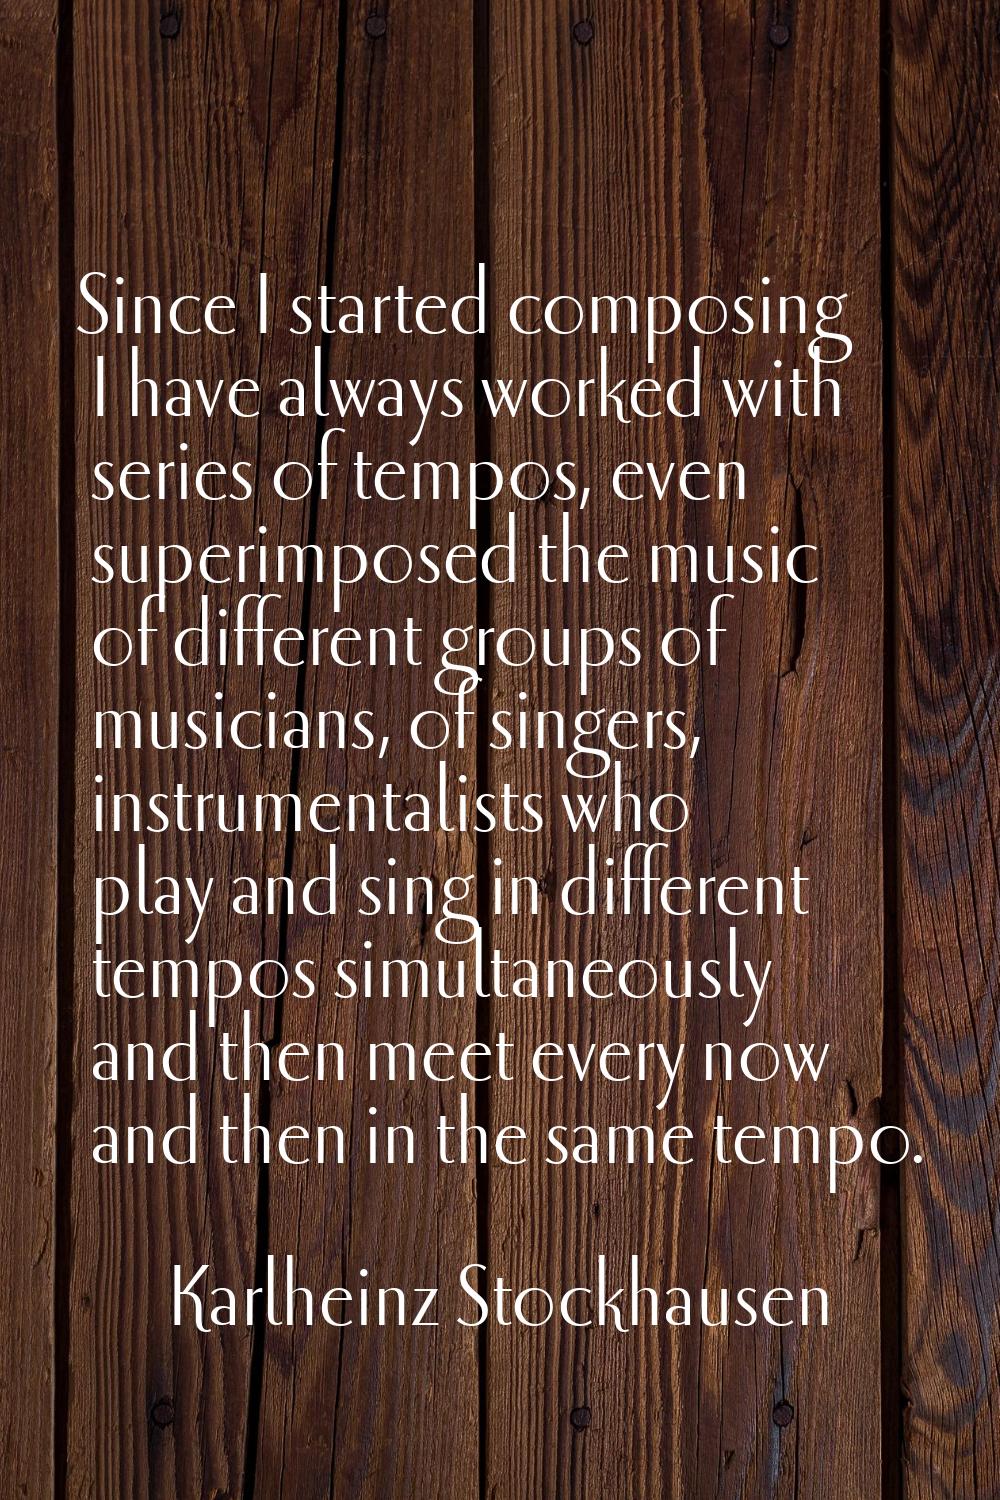 Since I started composing I have always worked with series of tempos, even superimposed the music o